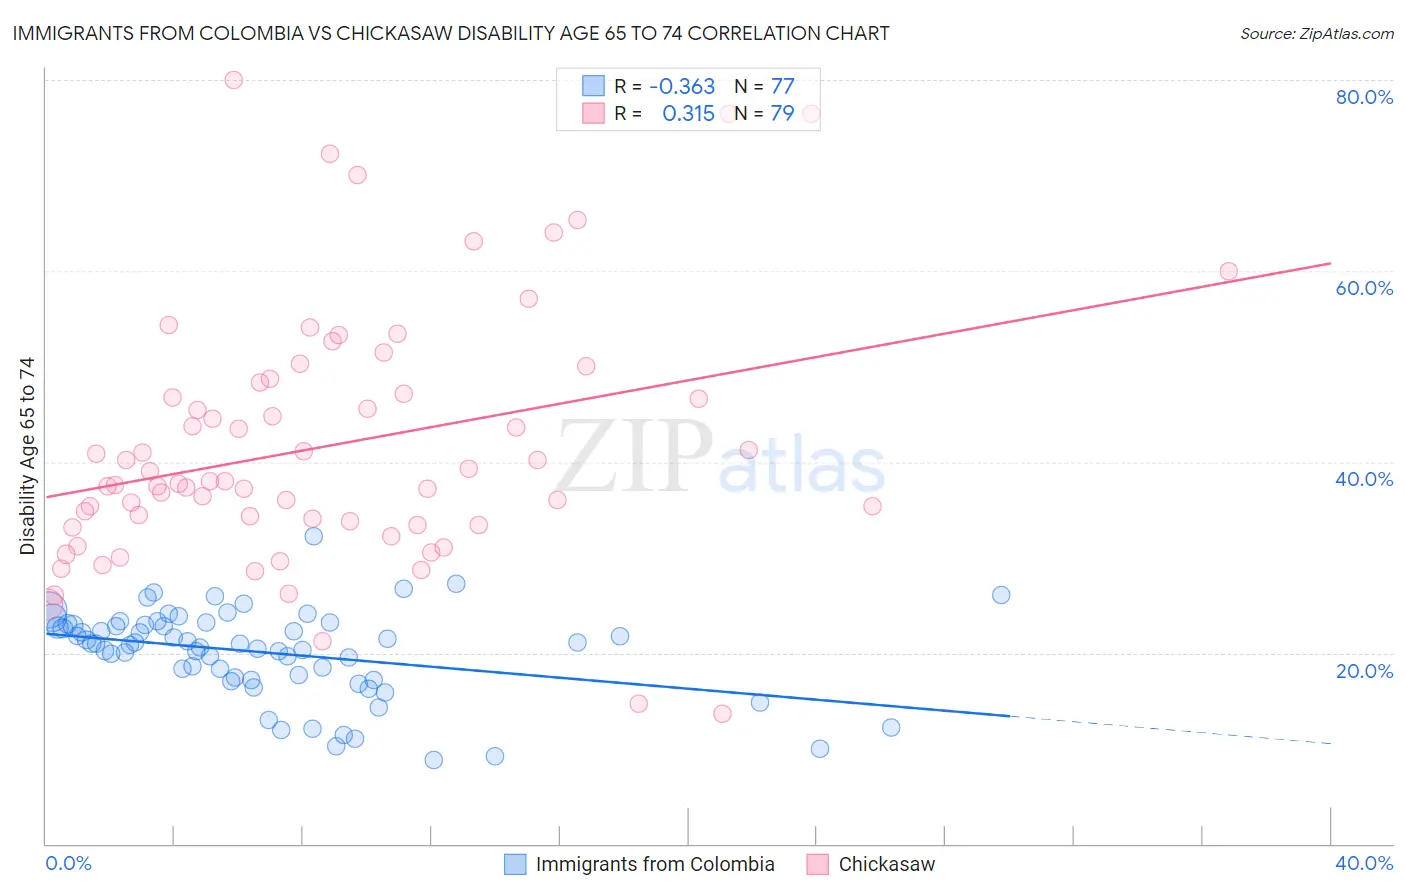 Immigrants from Colombia vs Chickasaw Disability Age 65 to 74